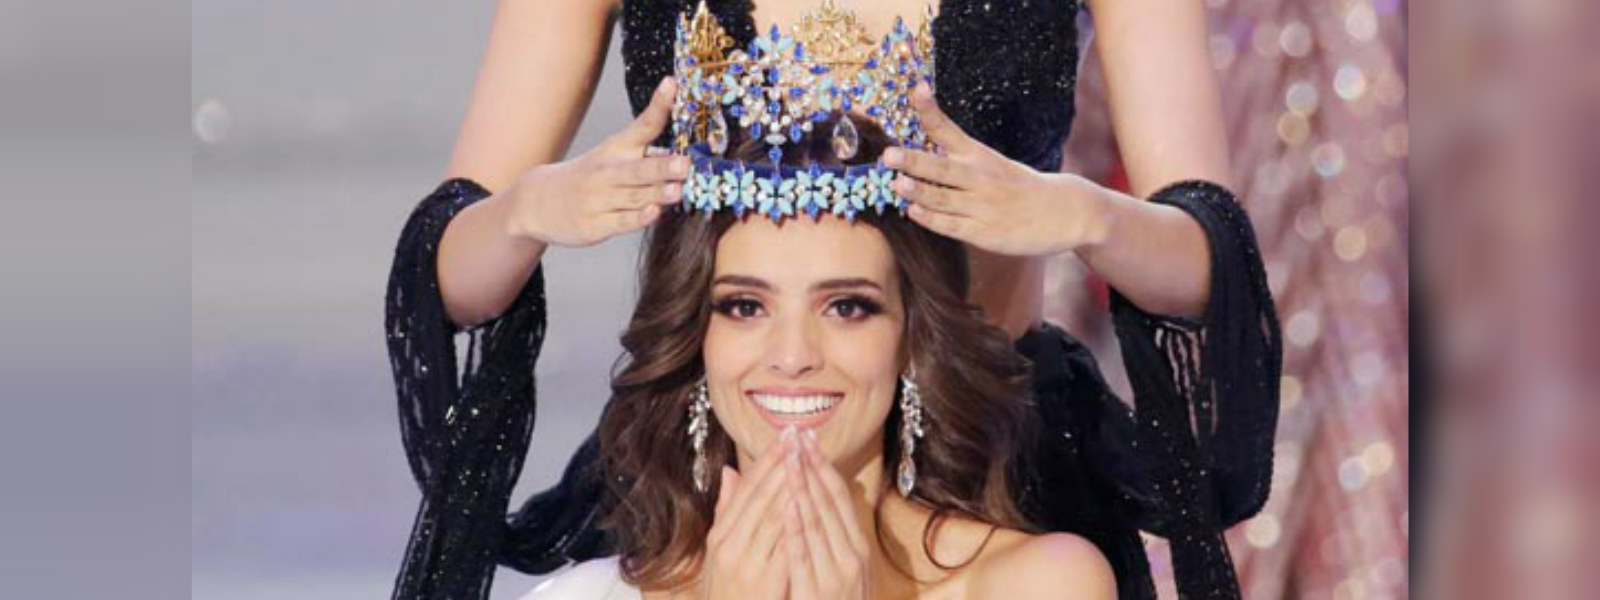 Mexico's Vanessa Ponce de Leon crowned Miss World 